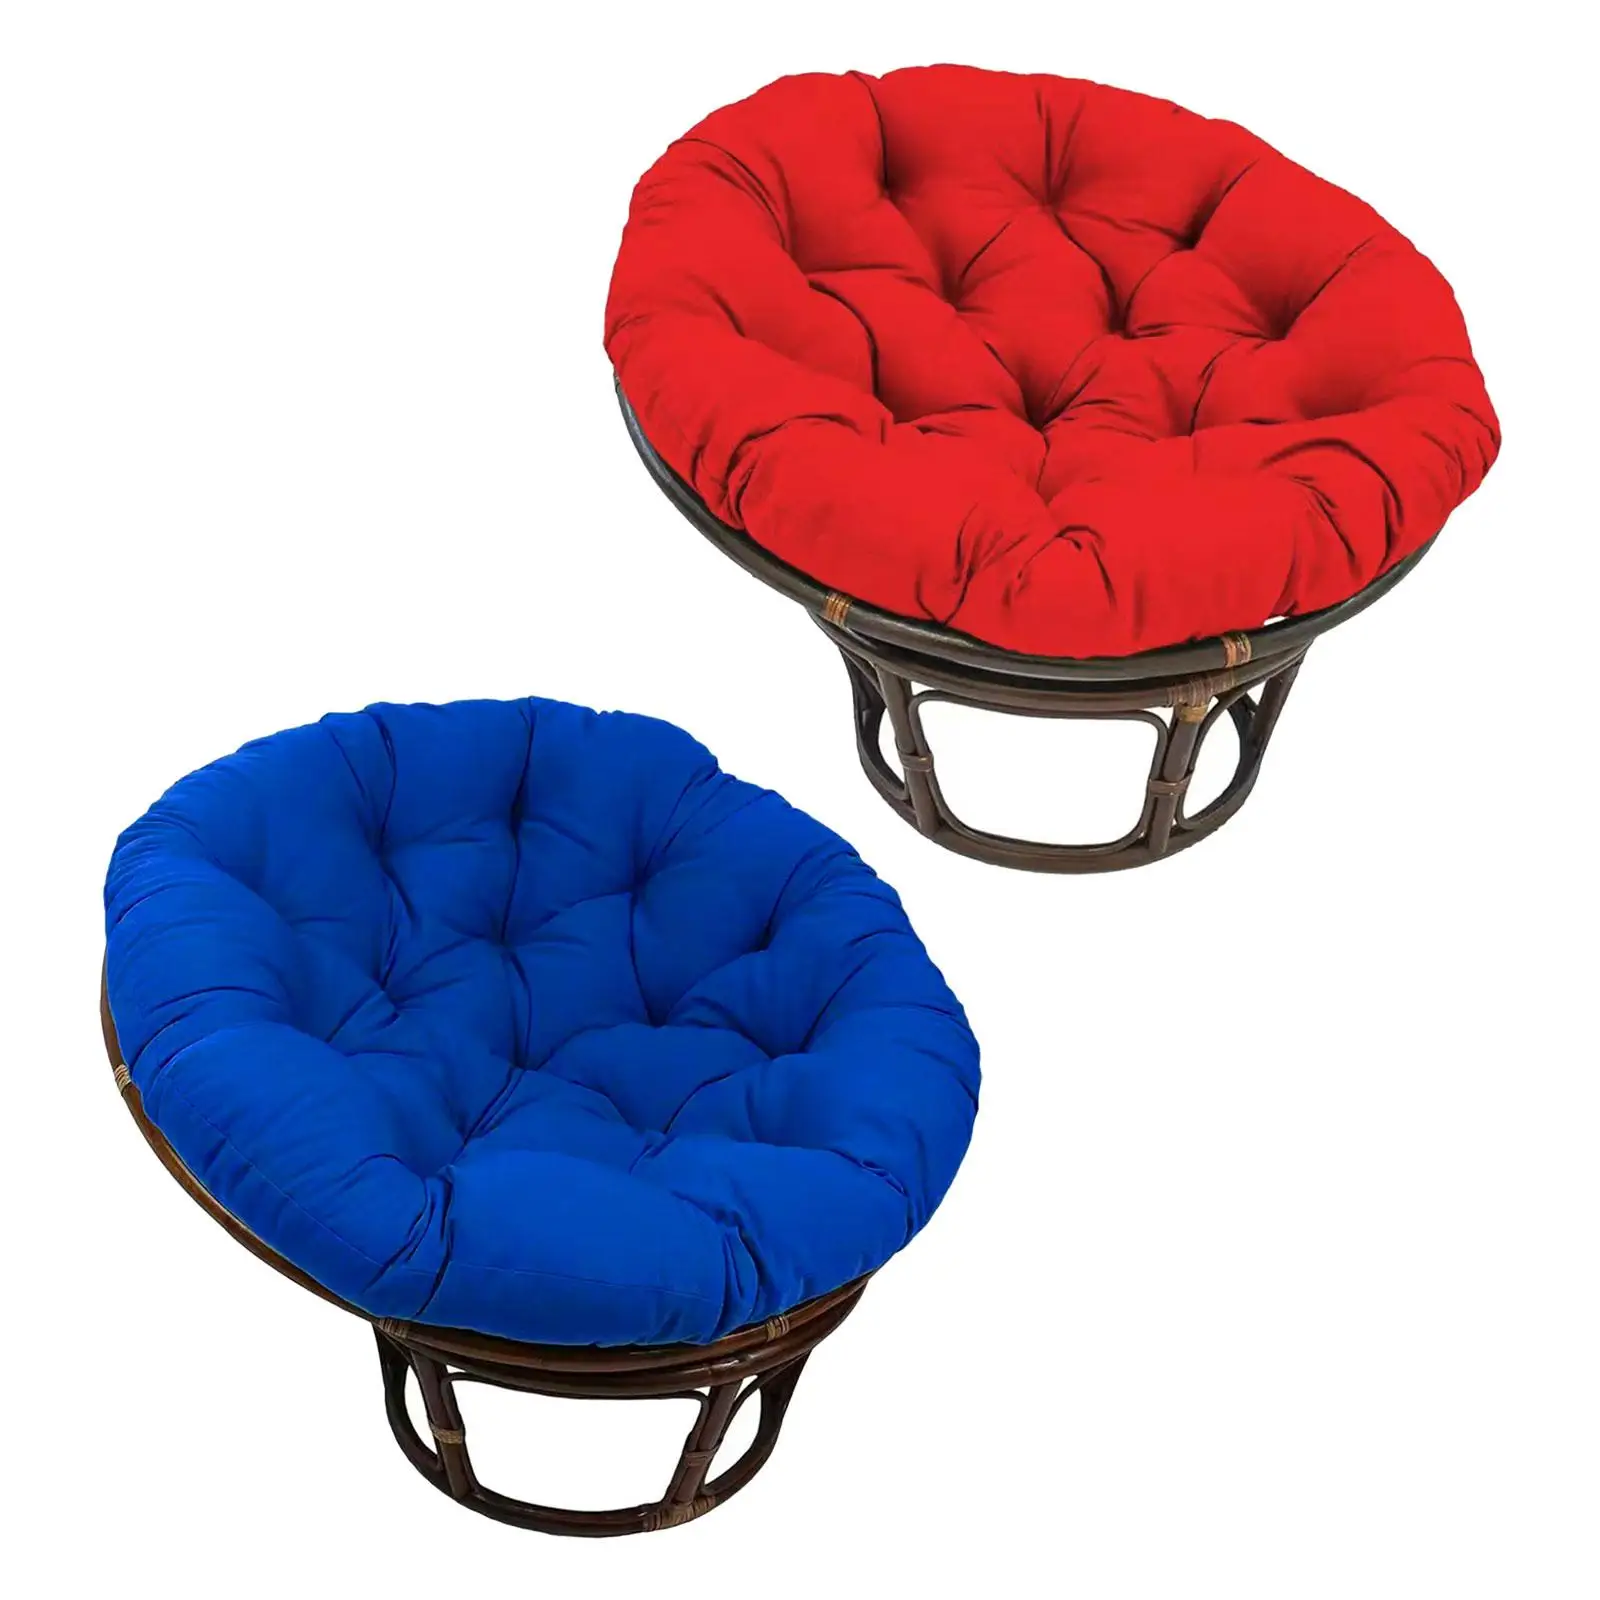 Hanging Basket Chair Cushion for Rocking Chairs Egg Chair Hanging Beds